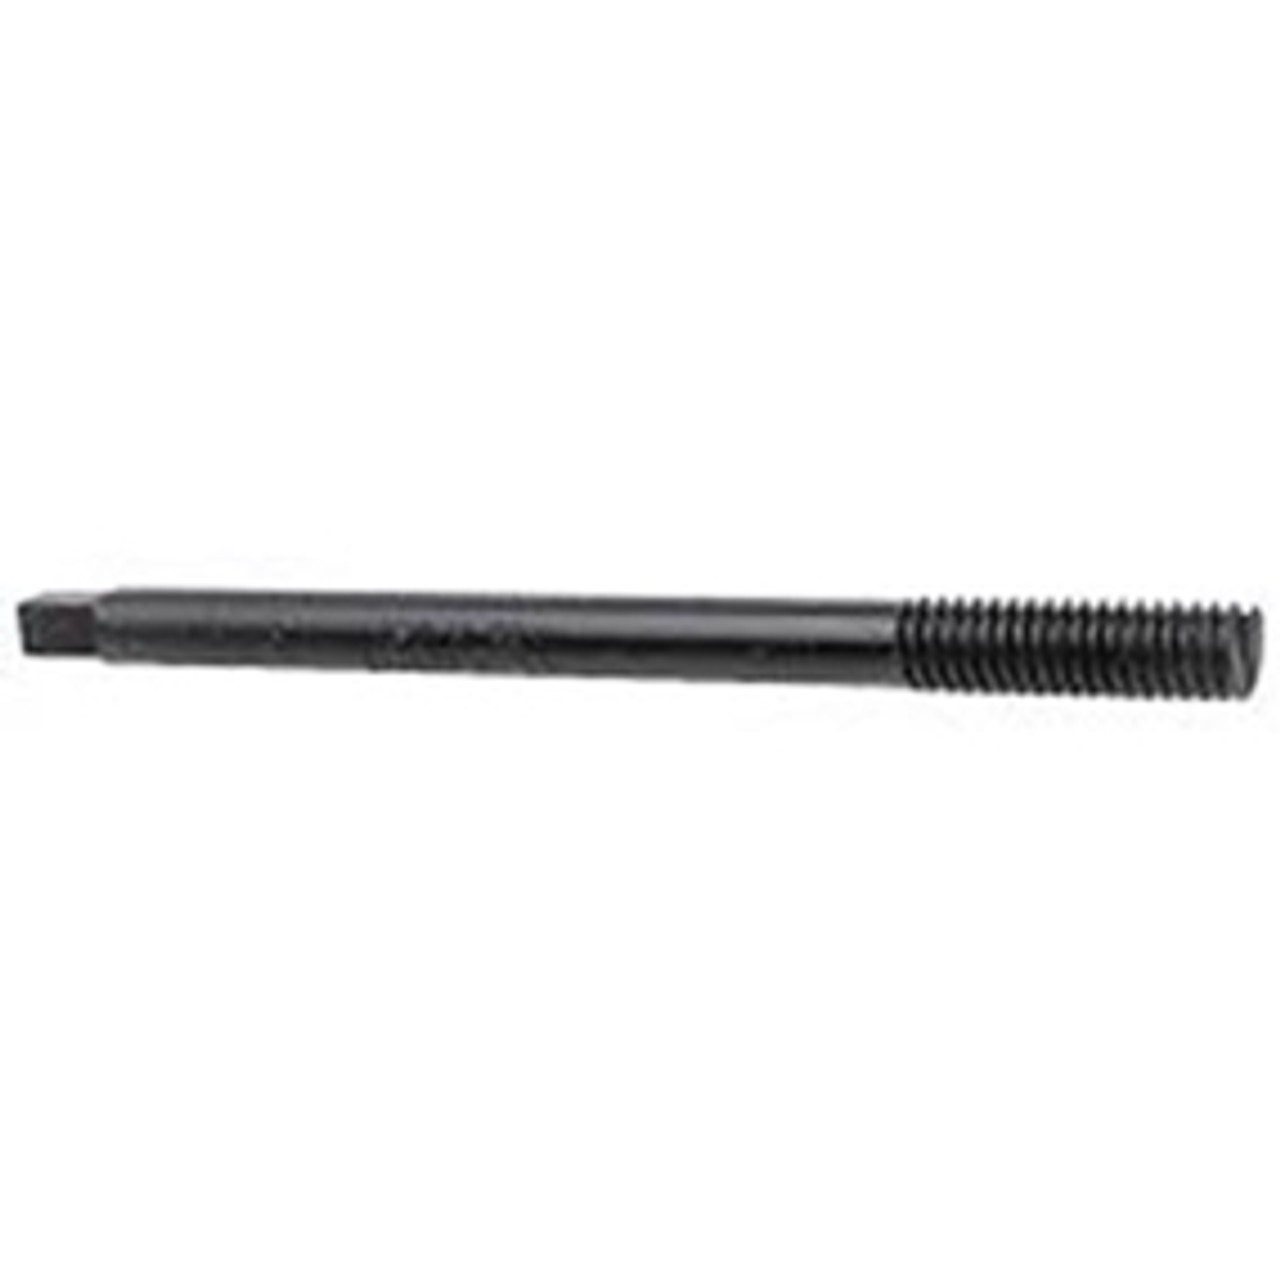 7/16"-14 Helicoil Installation Tool  2288-7